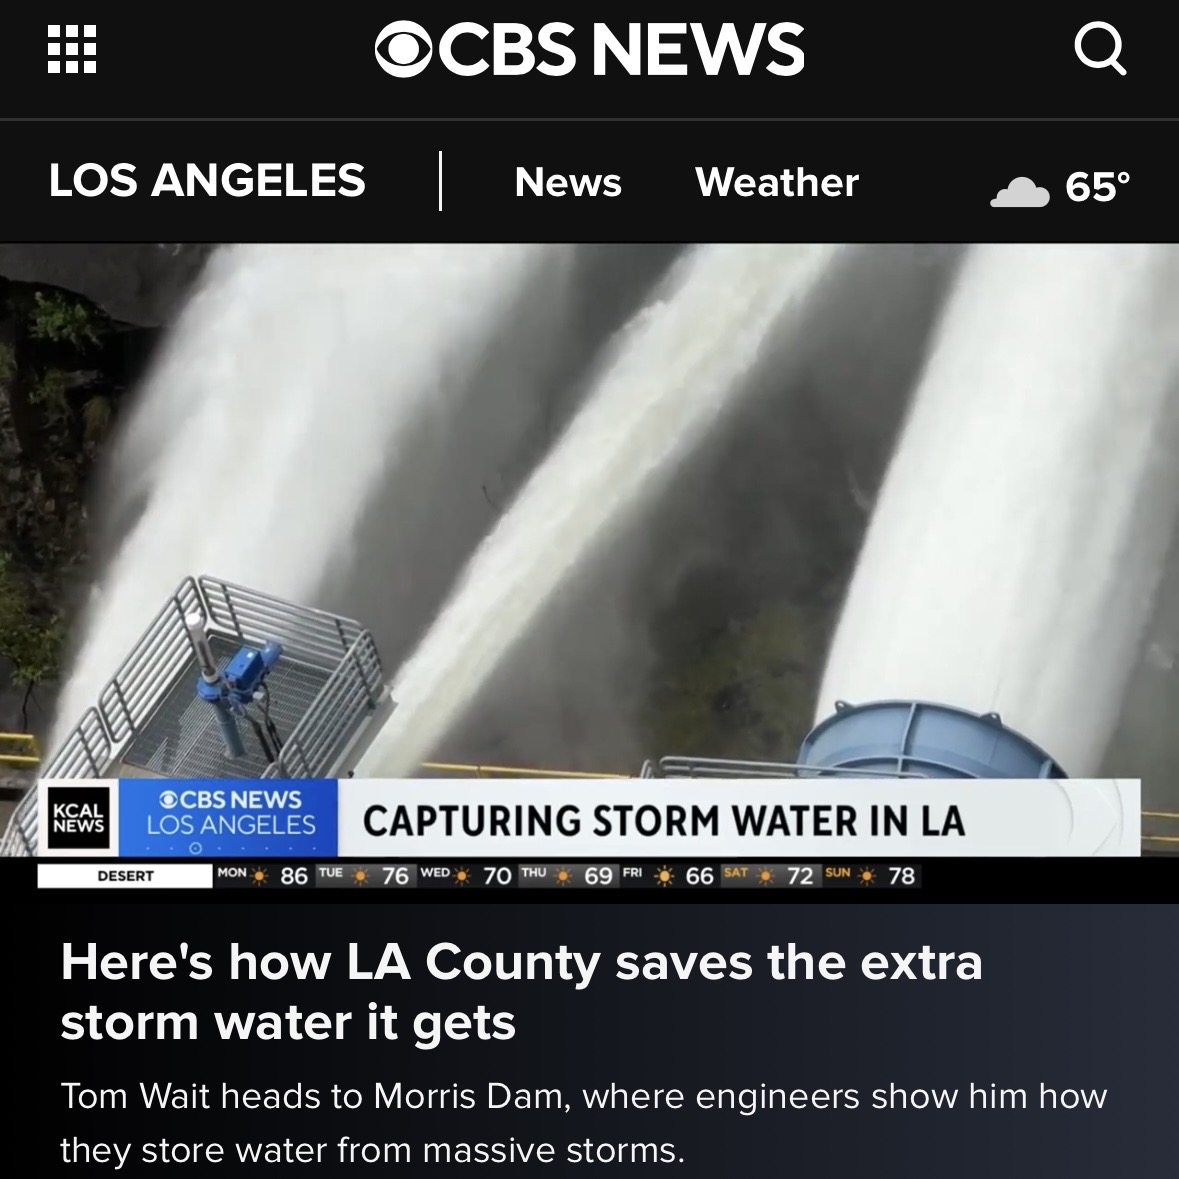 📣ICYMI: @Kcalnews got an up-close look at #MorrisDam, one of 14 major dams managed by #LACounty to capture and store #stormwater during this year’s record-breaking rainfall 🌧️ Watch the clip at the🔗link in bio. #WaterforLA #StormwaterCapture